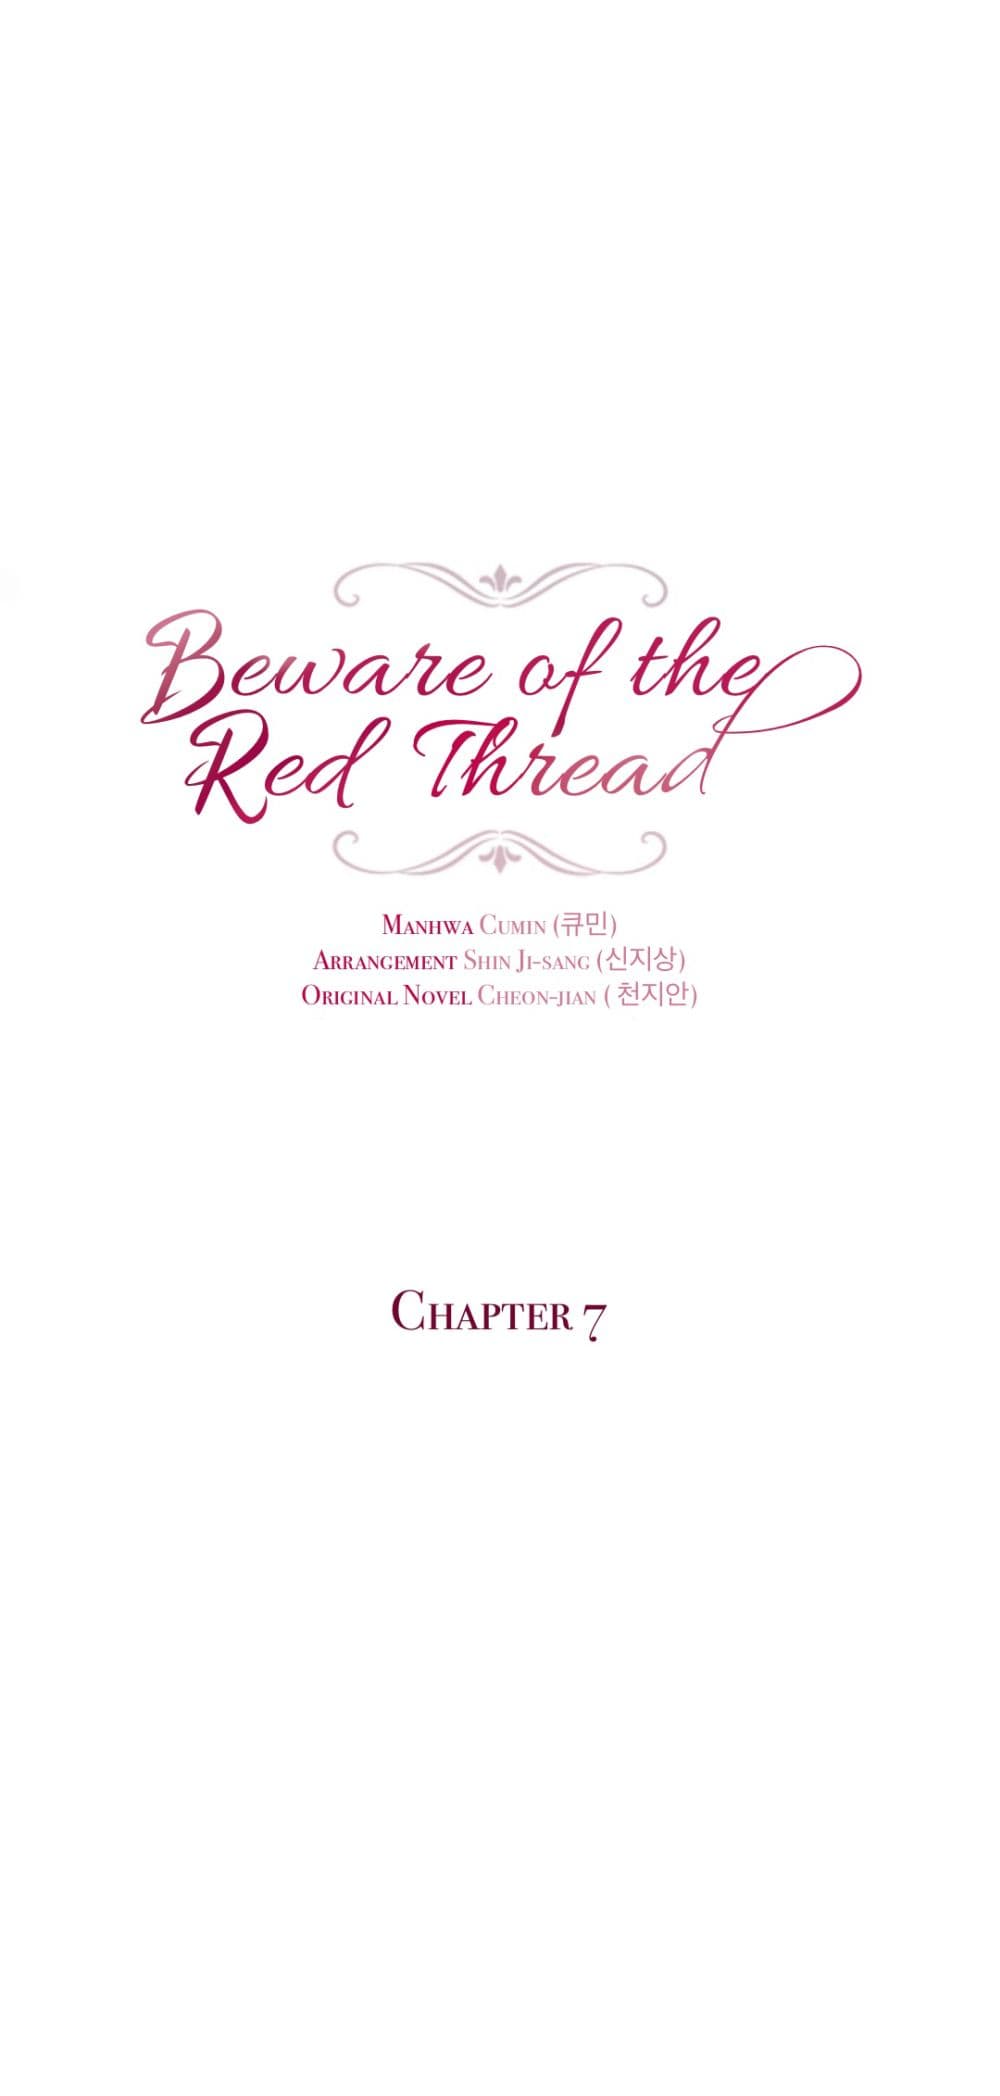 Beware of the Red Thread7 02